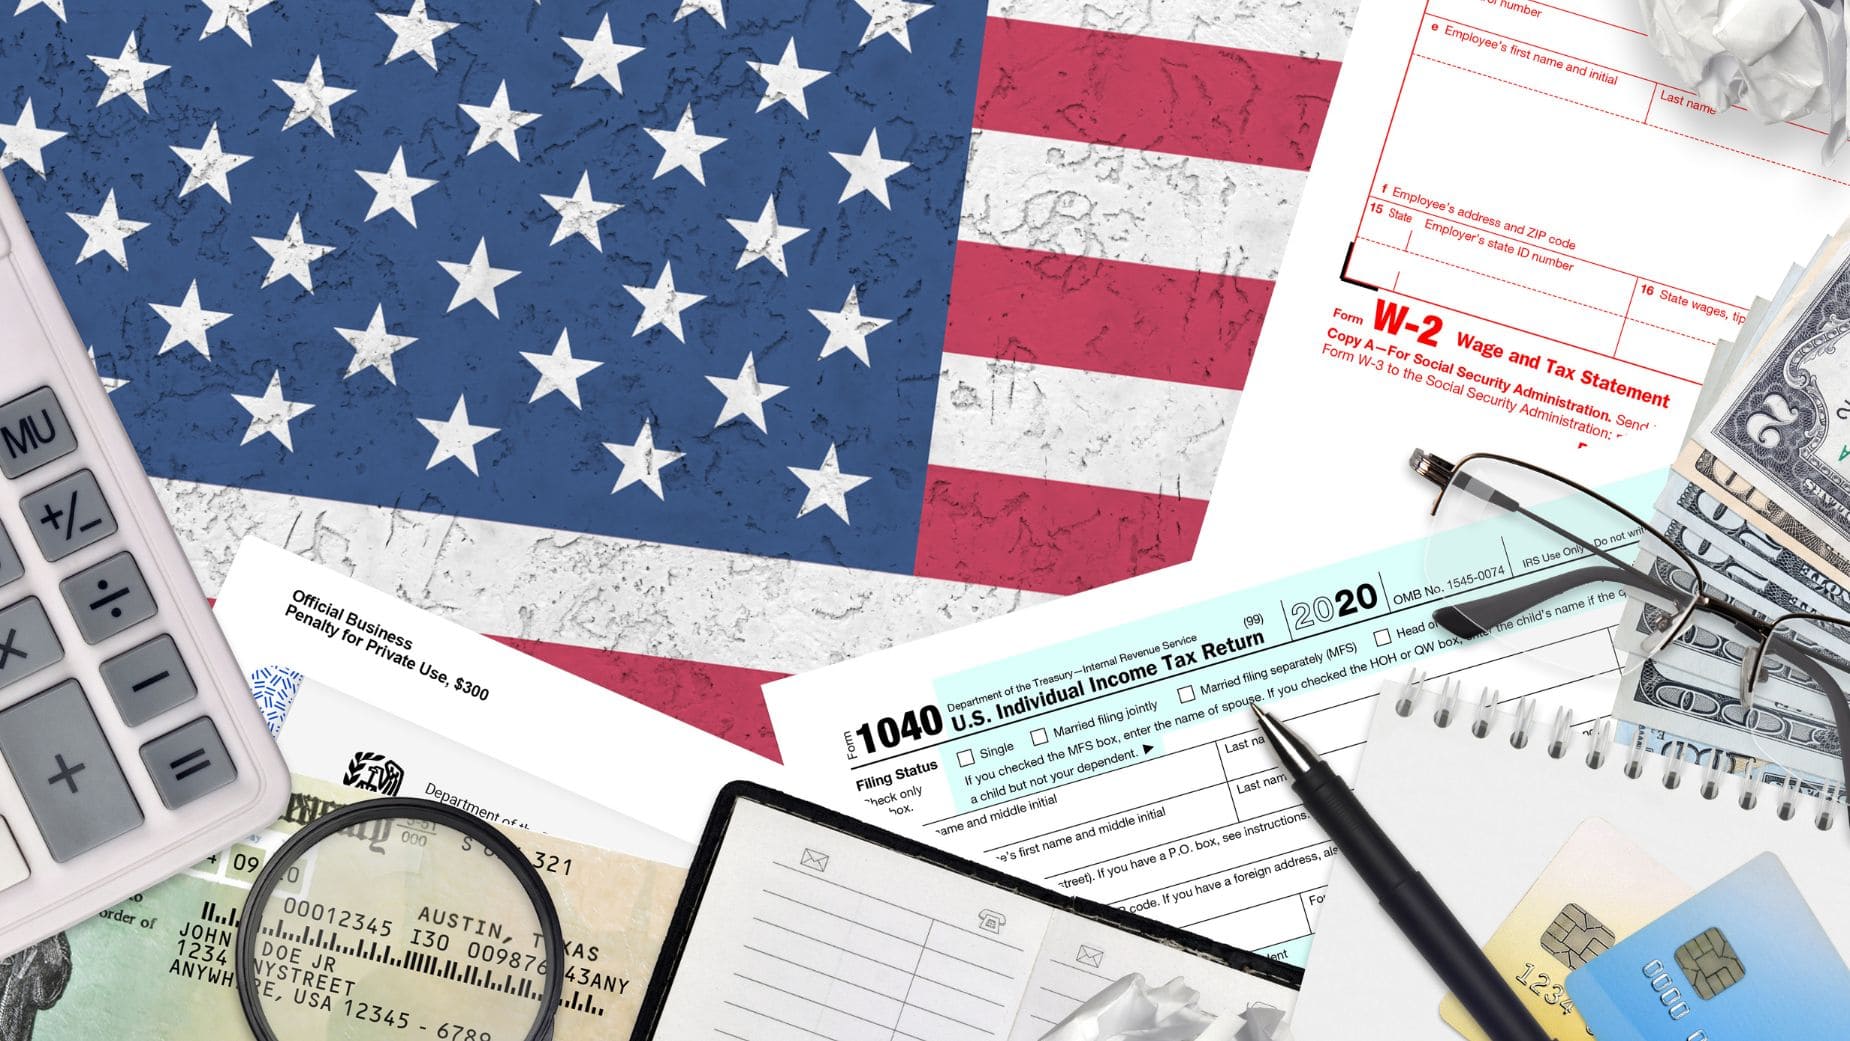 Prepare your documentos in case you have to send your Tax Return to the IRS